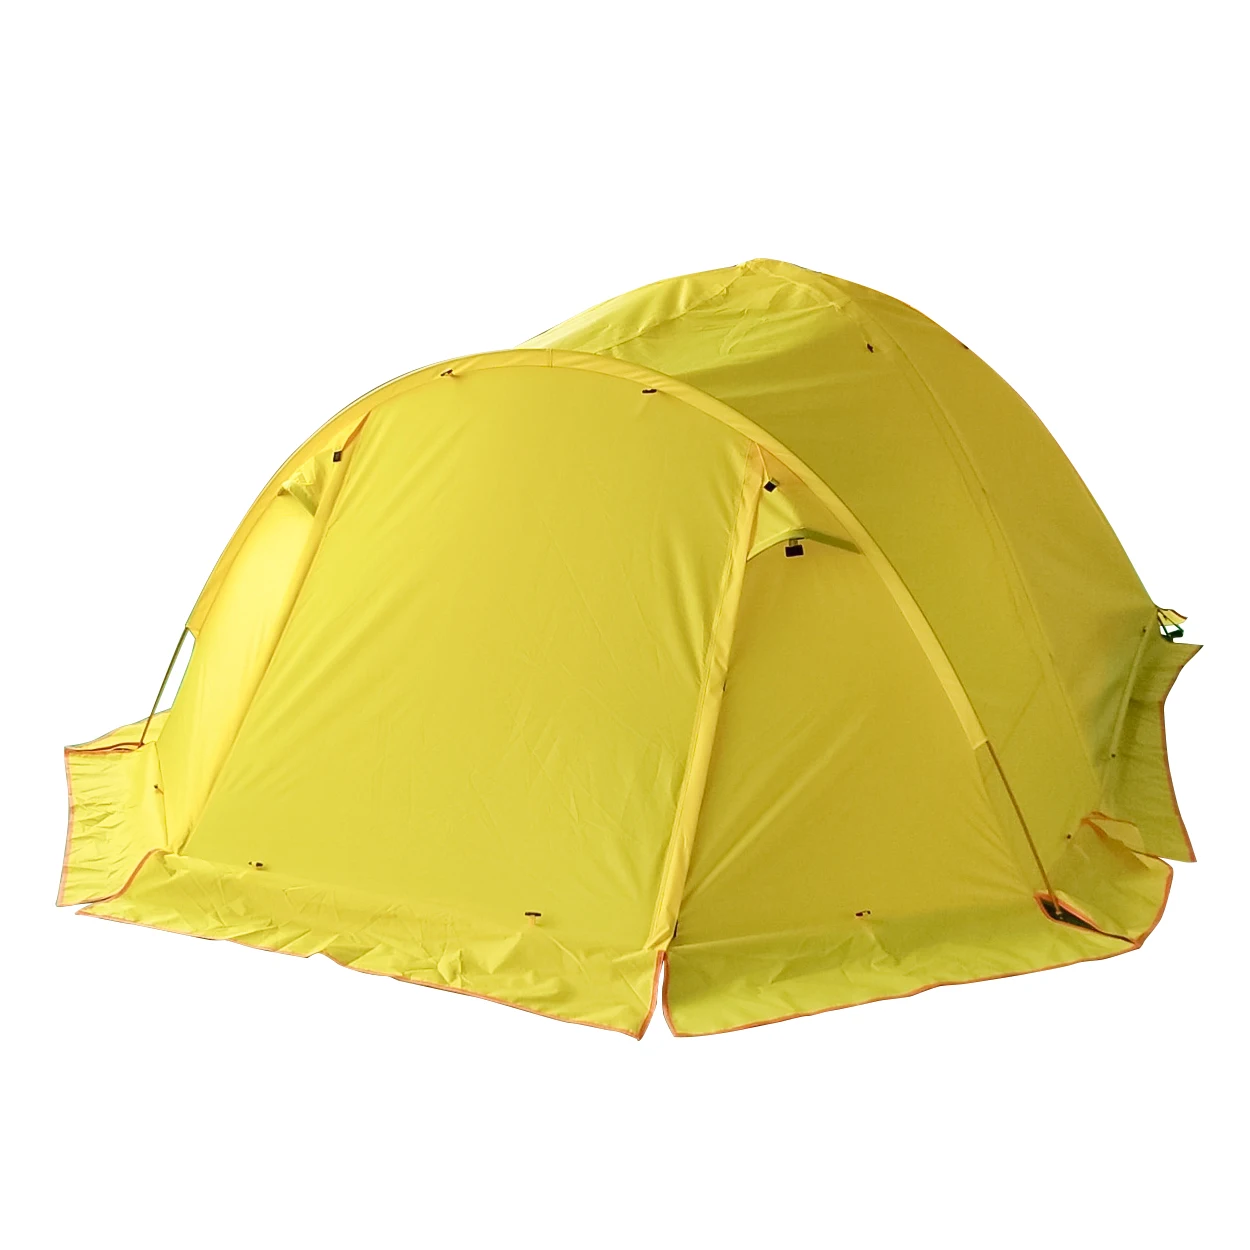 Pandaman-Tear Resistant Camping Tent, Windproof Light, 210T, Plaid Polyester, PU3000mm, 4-6 Person with Snow Skirt